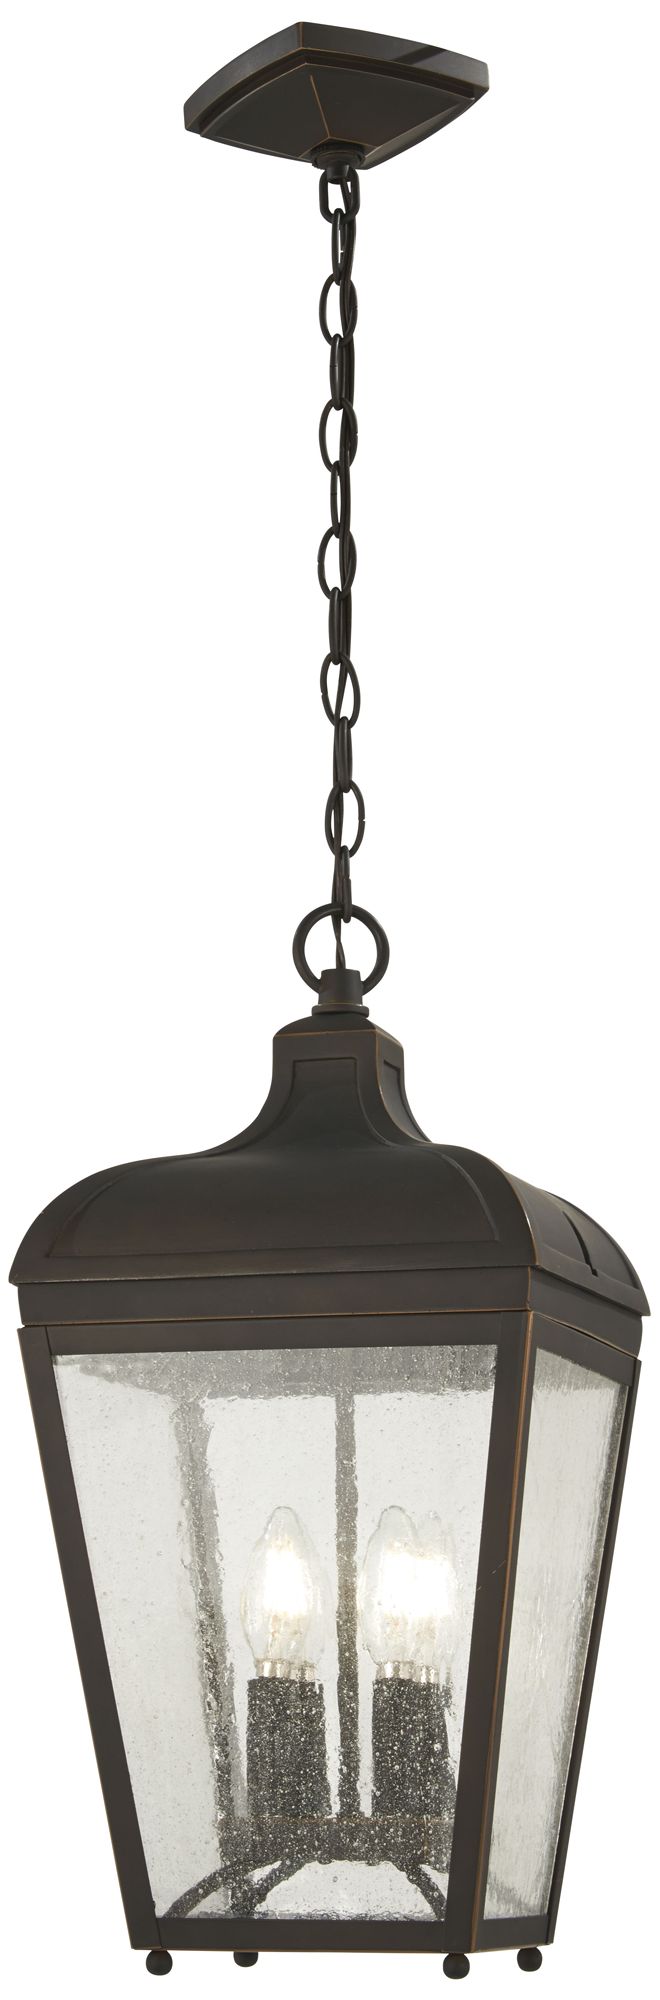 The Great Outdoors Marquee 4-Light Bronze and Gold Outdoor Hung Lantern